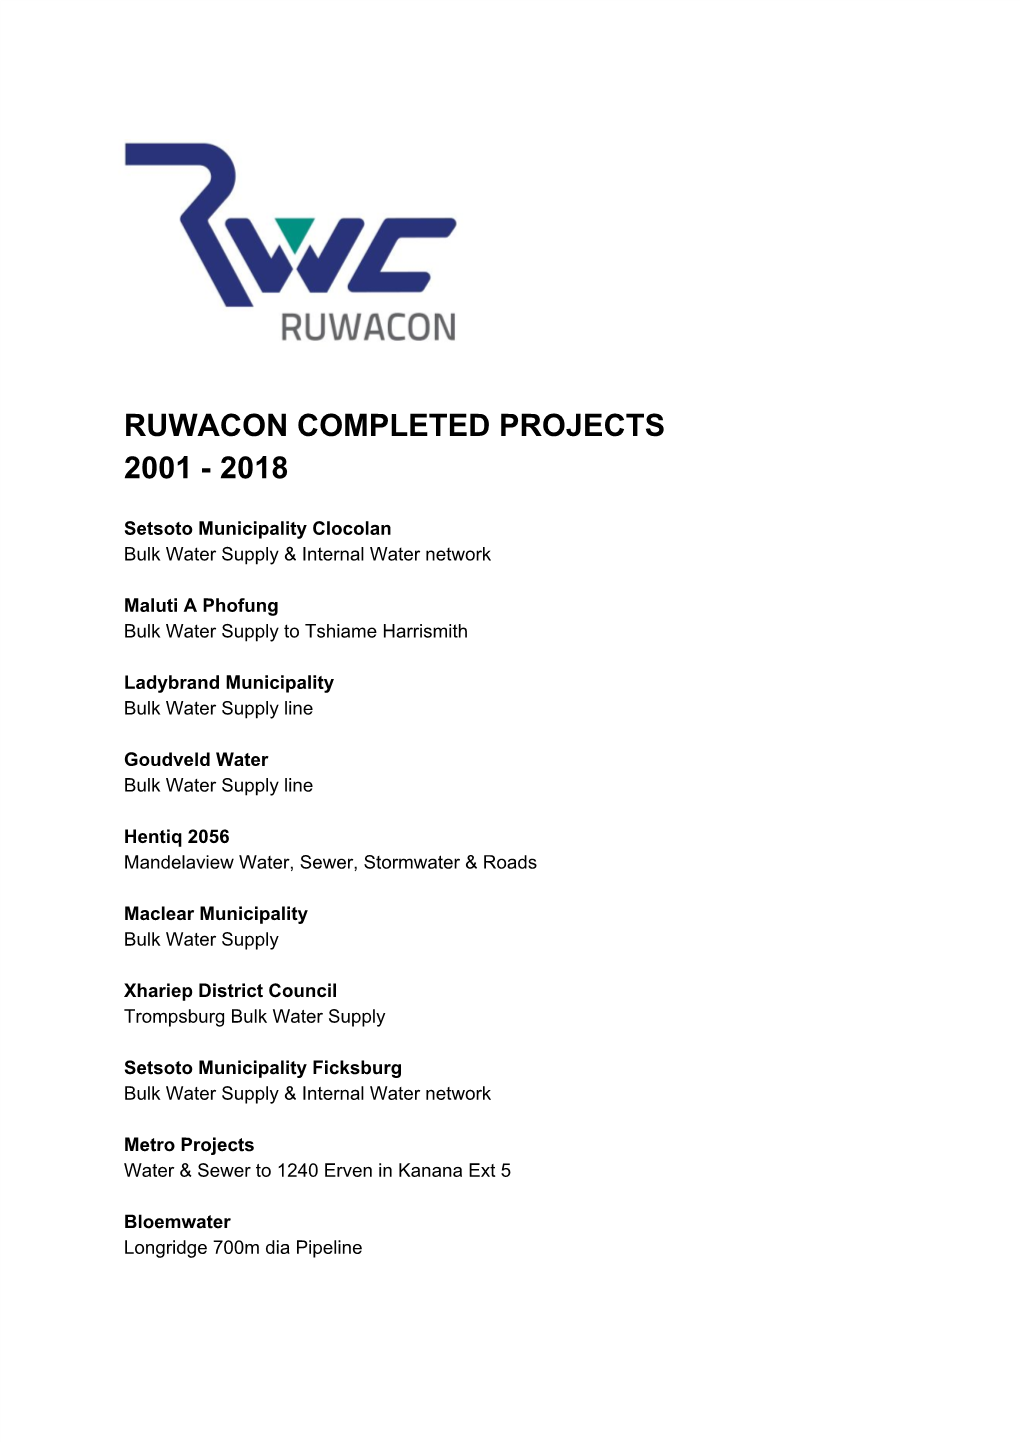 Ruwacon Completed Projects 2001 - 2018